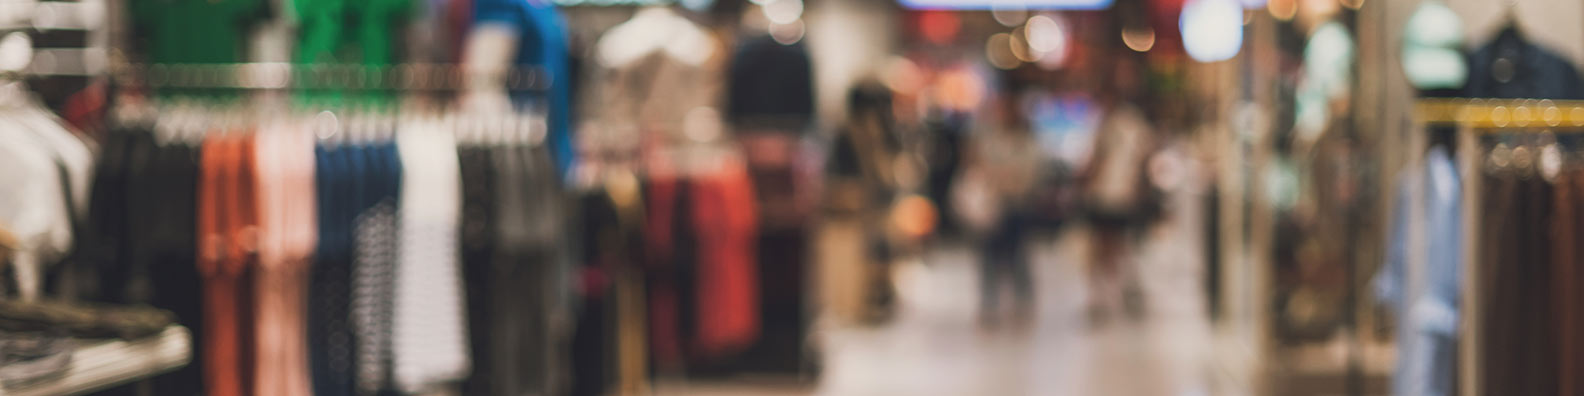 Retail Department Store LinkedIn Background Image